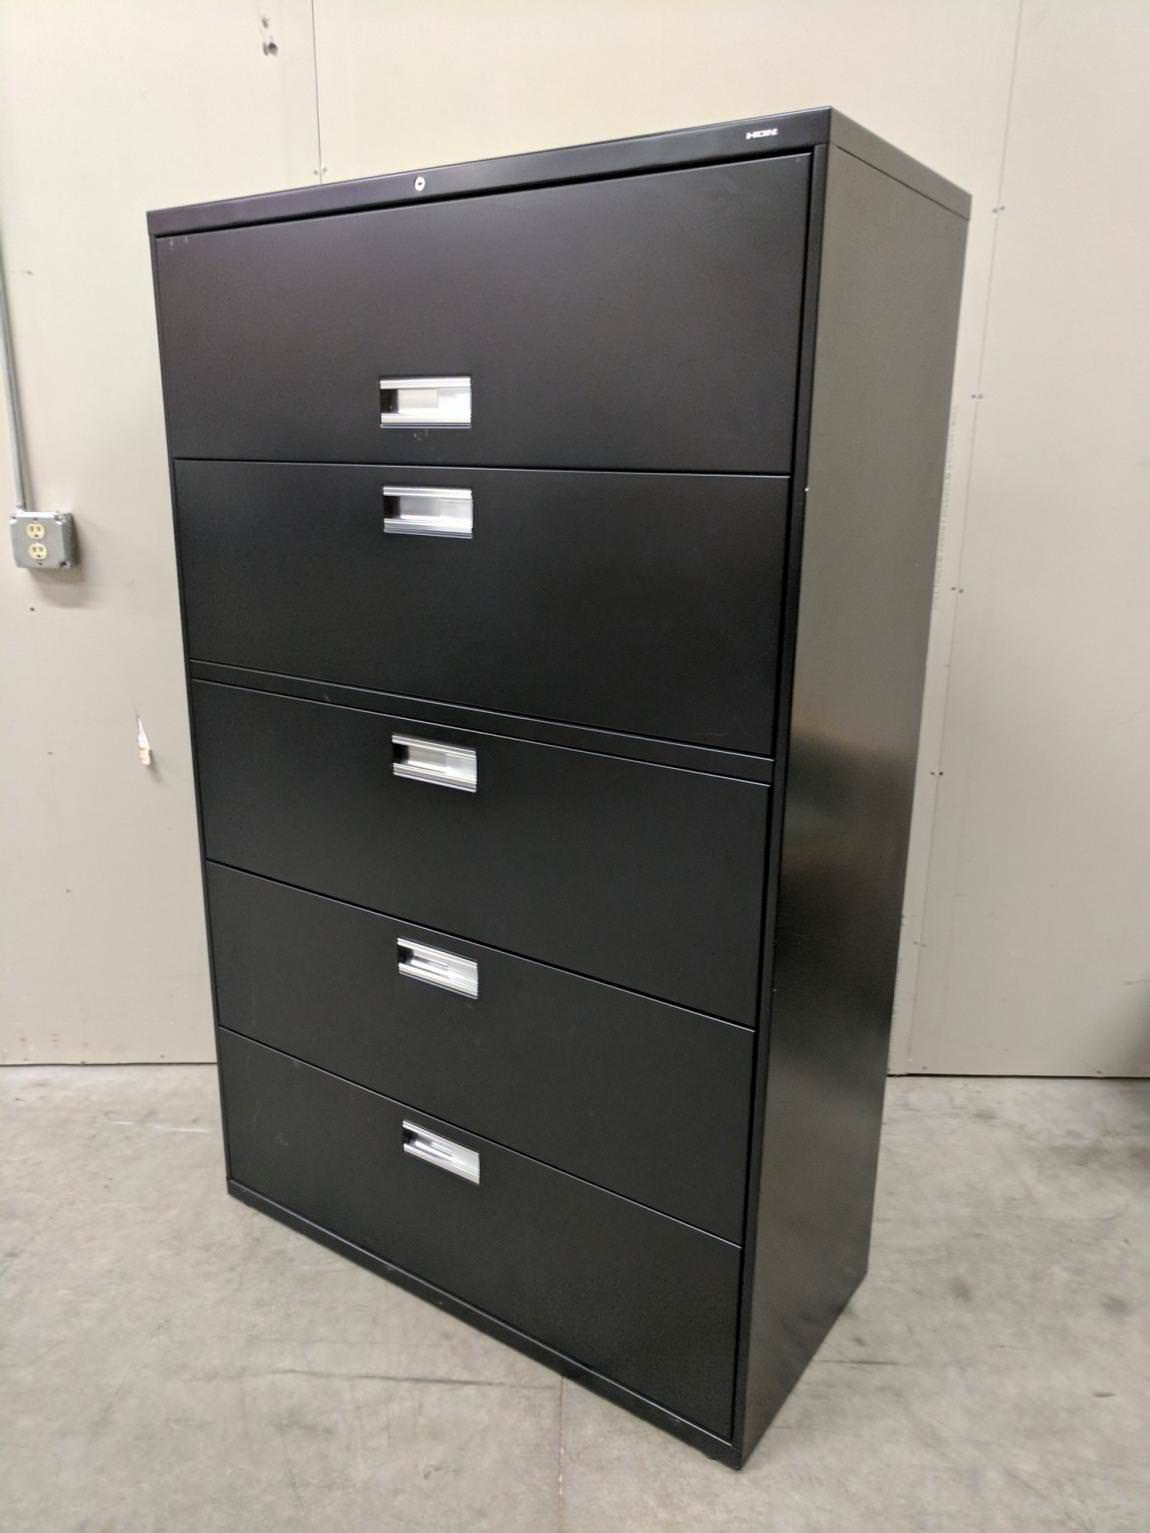 Black Hon 5 Drawer Lateral File Cabinet – 42 Inch Wide